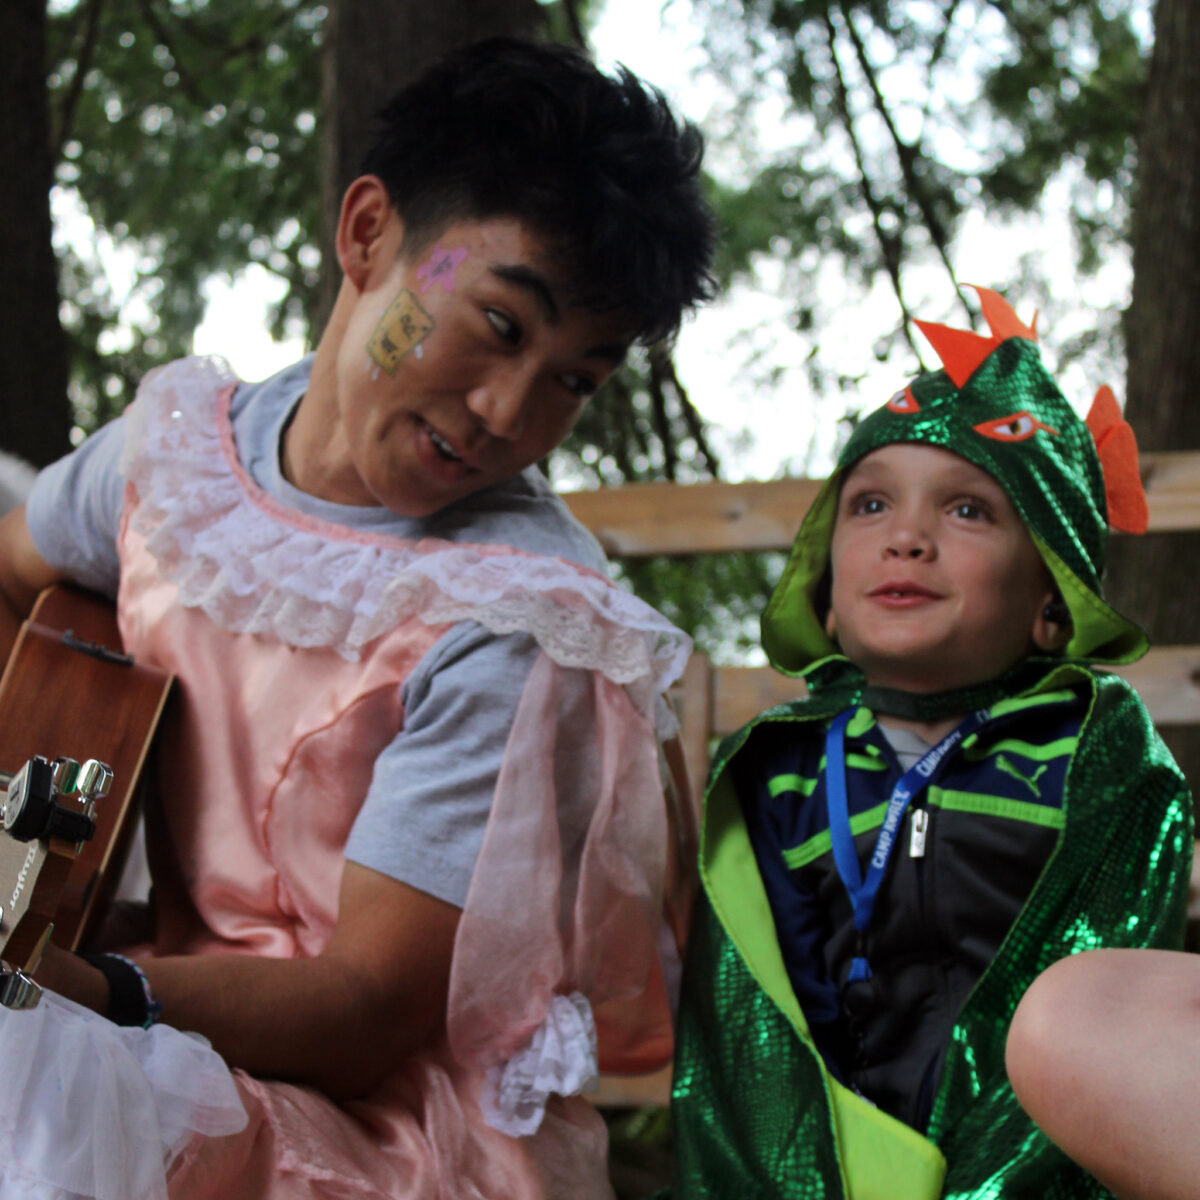 a camper in a dinosaur costume sits on the stage and sings as a camp counselor plays guitar